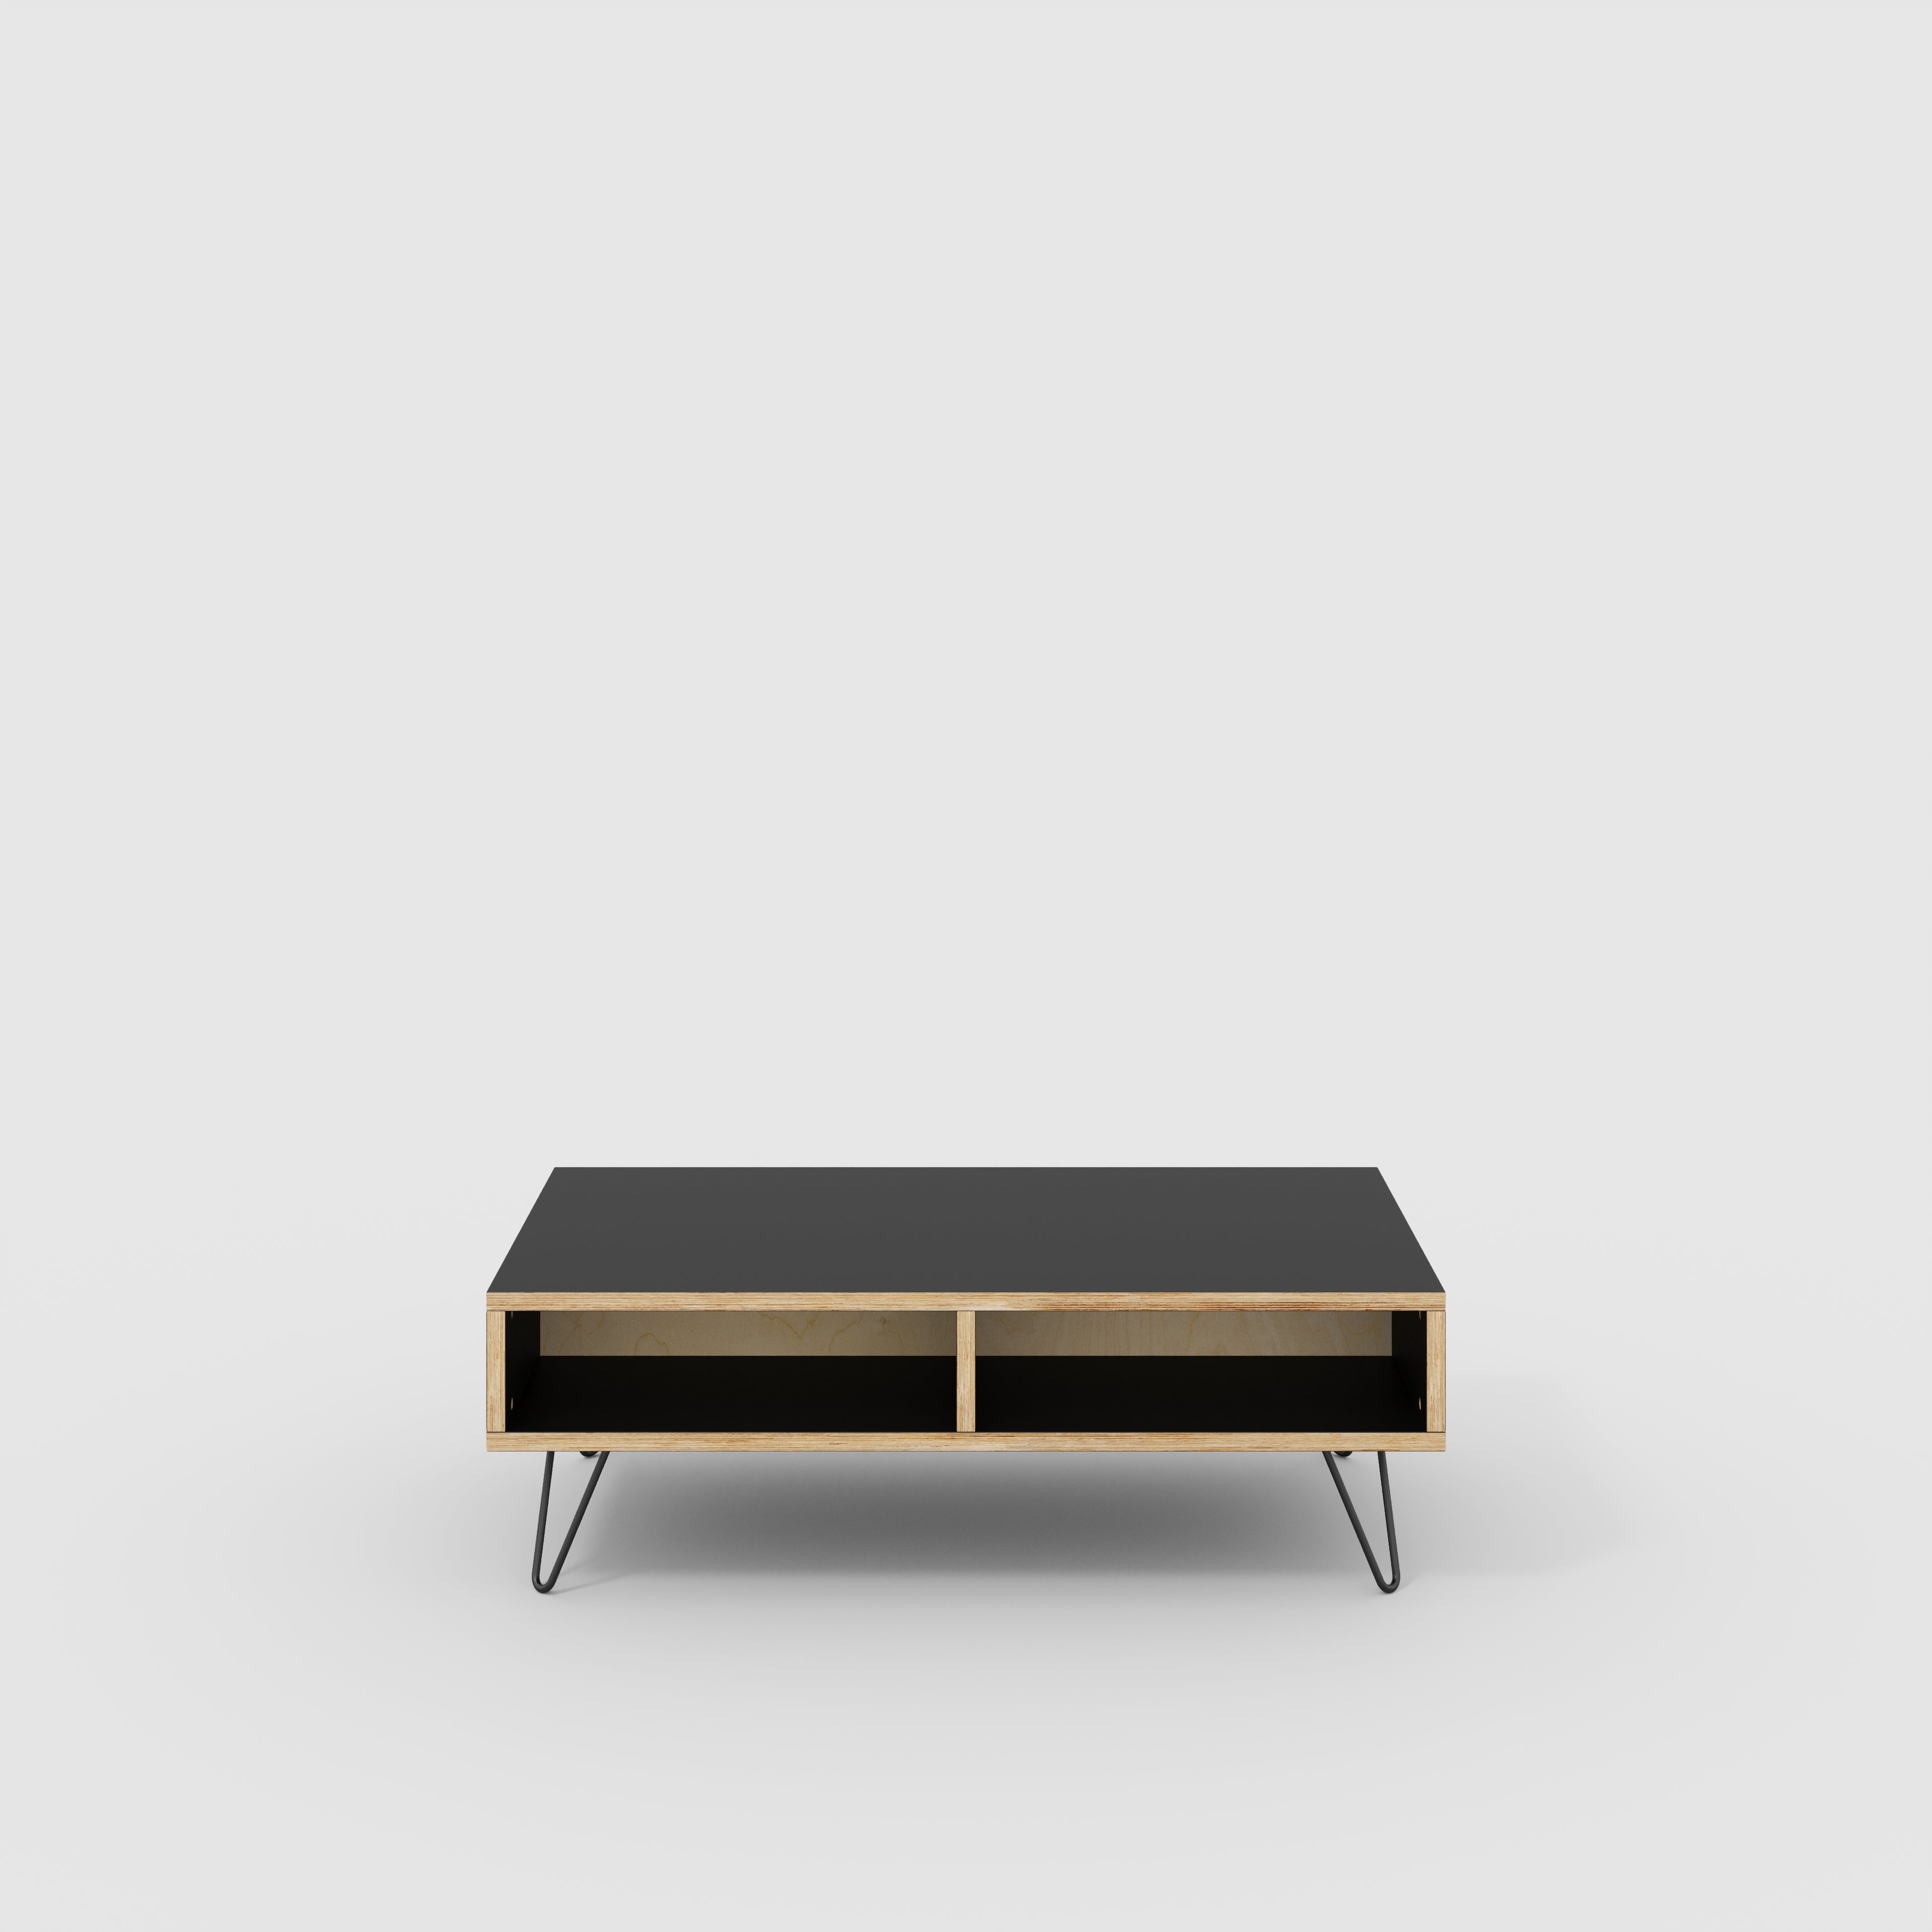 Coffee Table with Box Storage and Black Hairpin Legs - Formica Diamond Black - 1200(w) x 600(d) x 400(h)